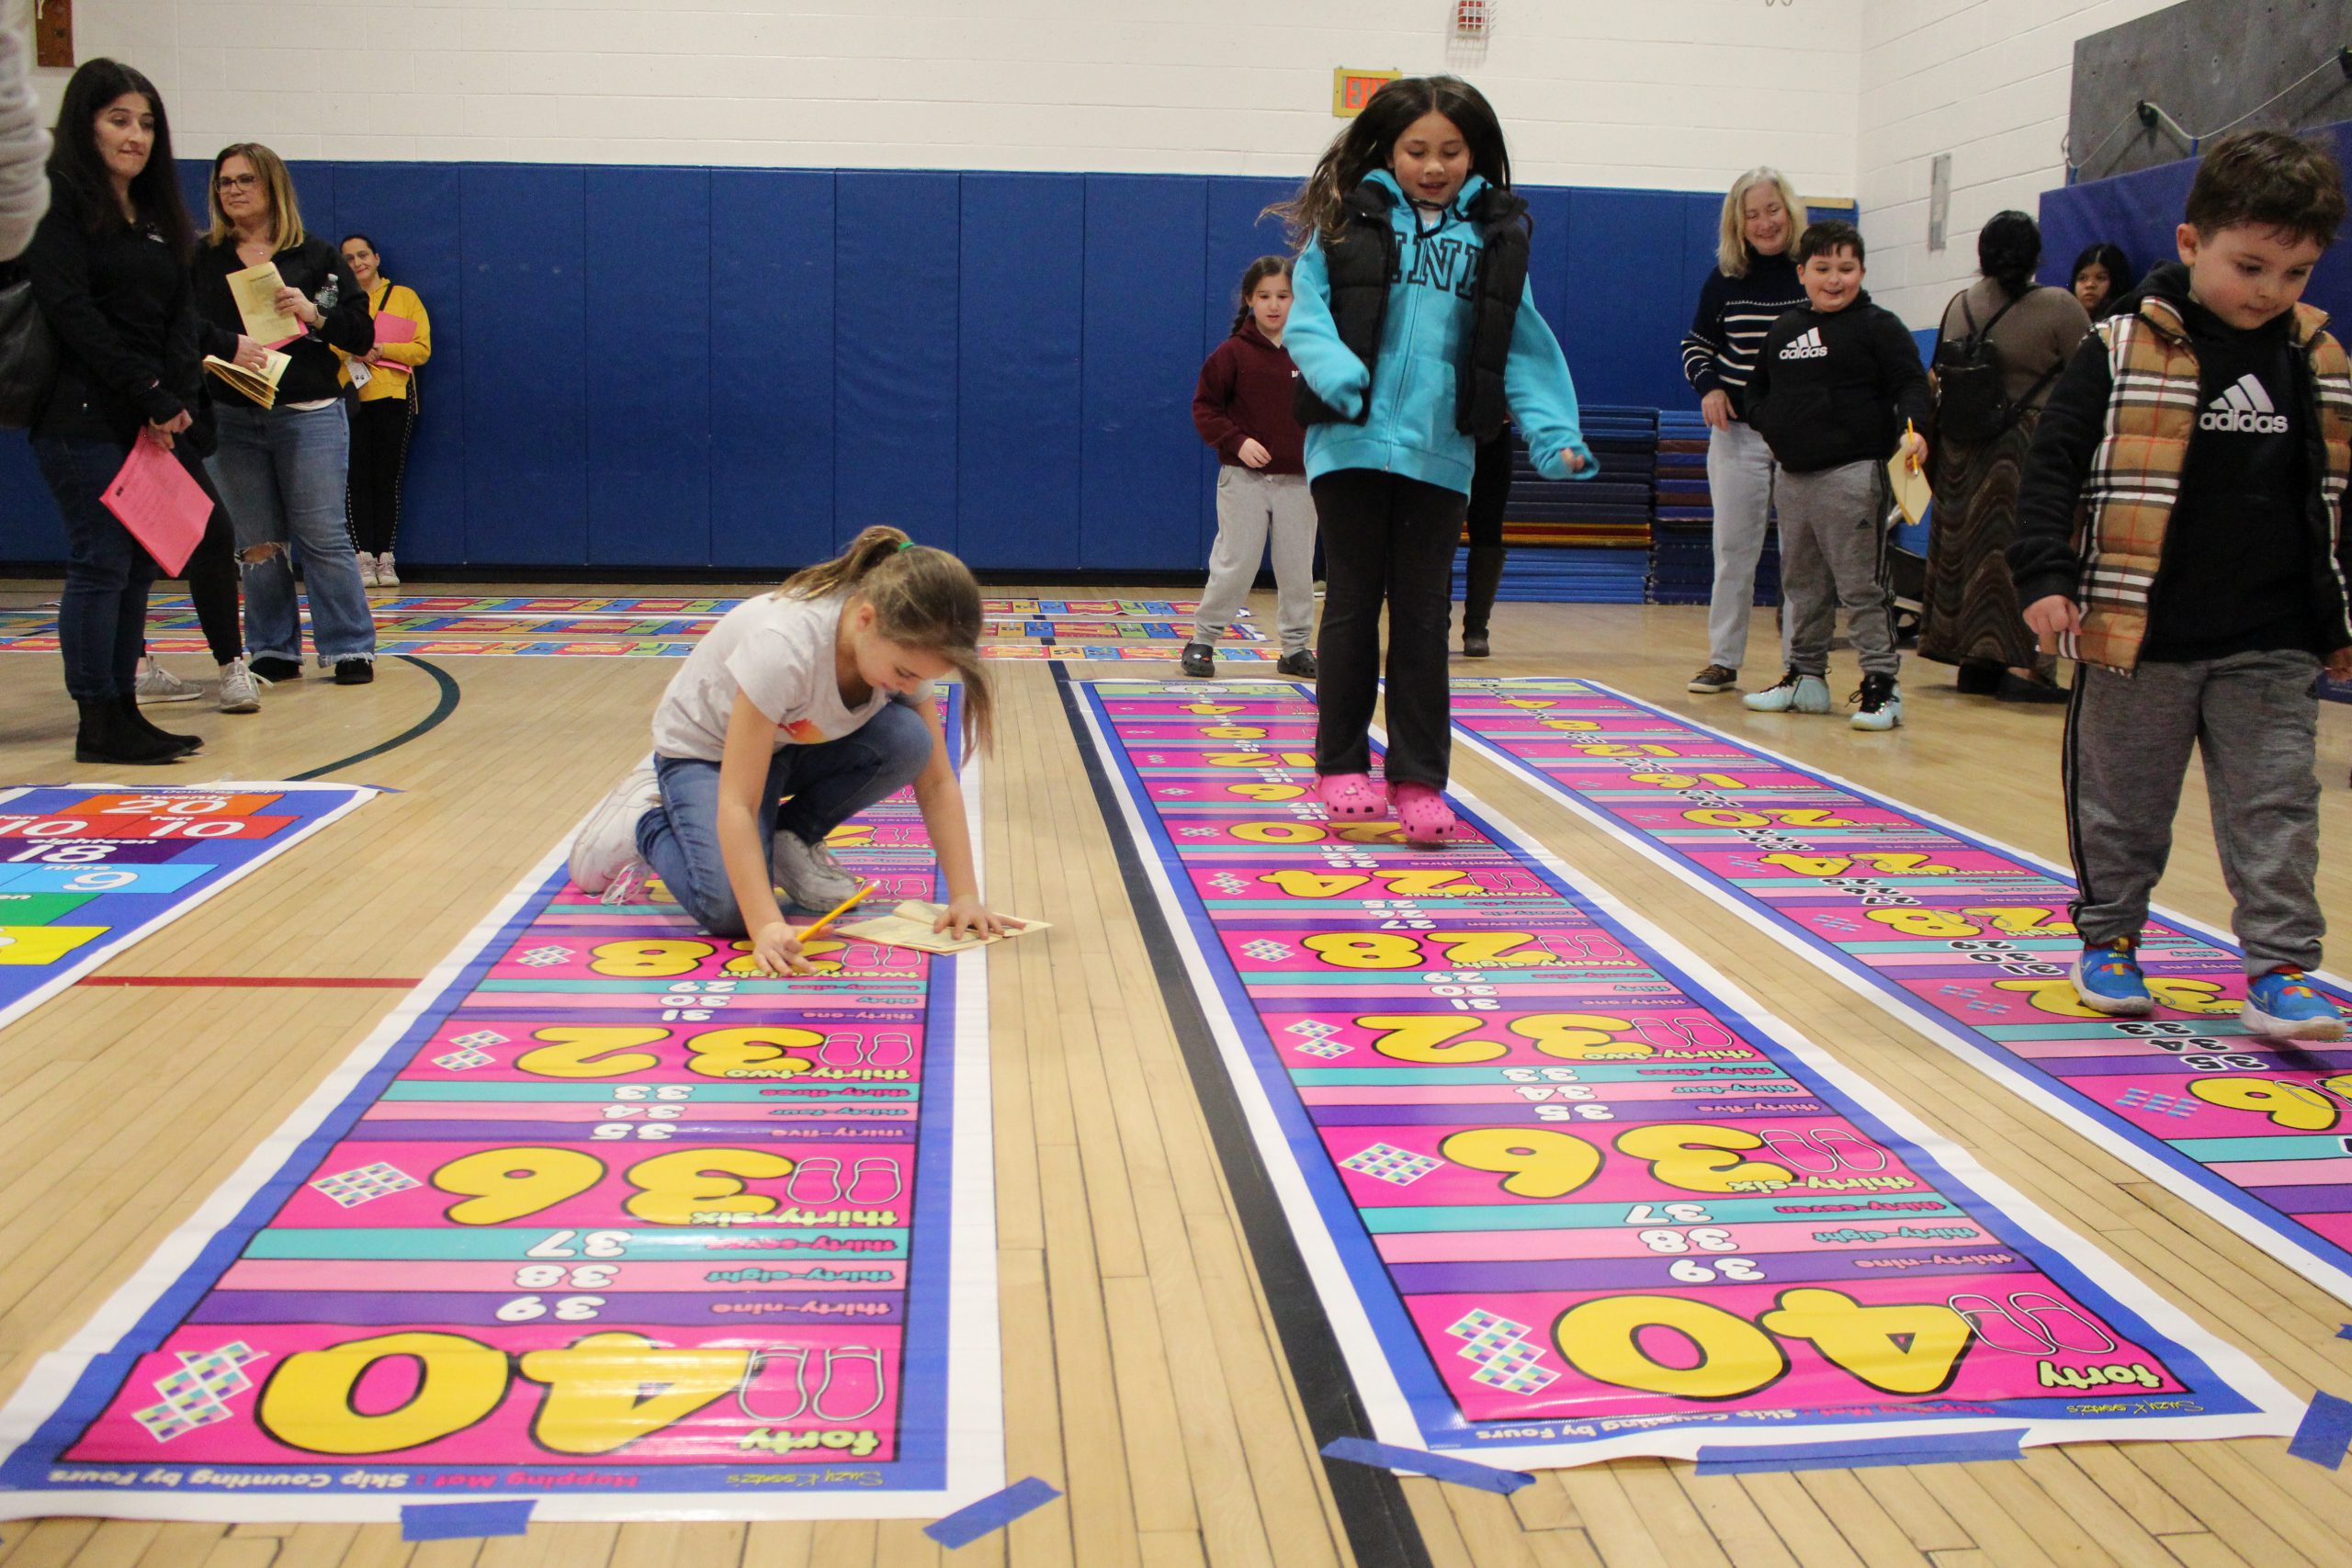 a student hops down a hopscoth-like bright mat